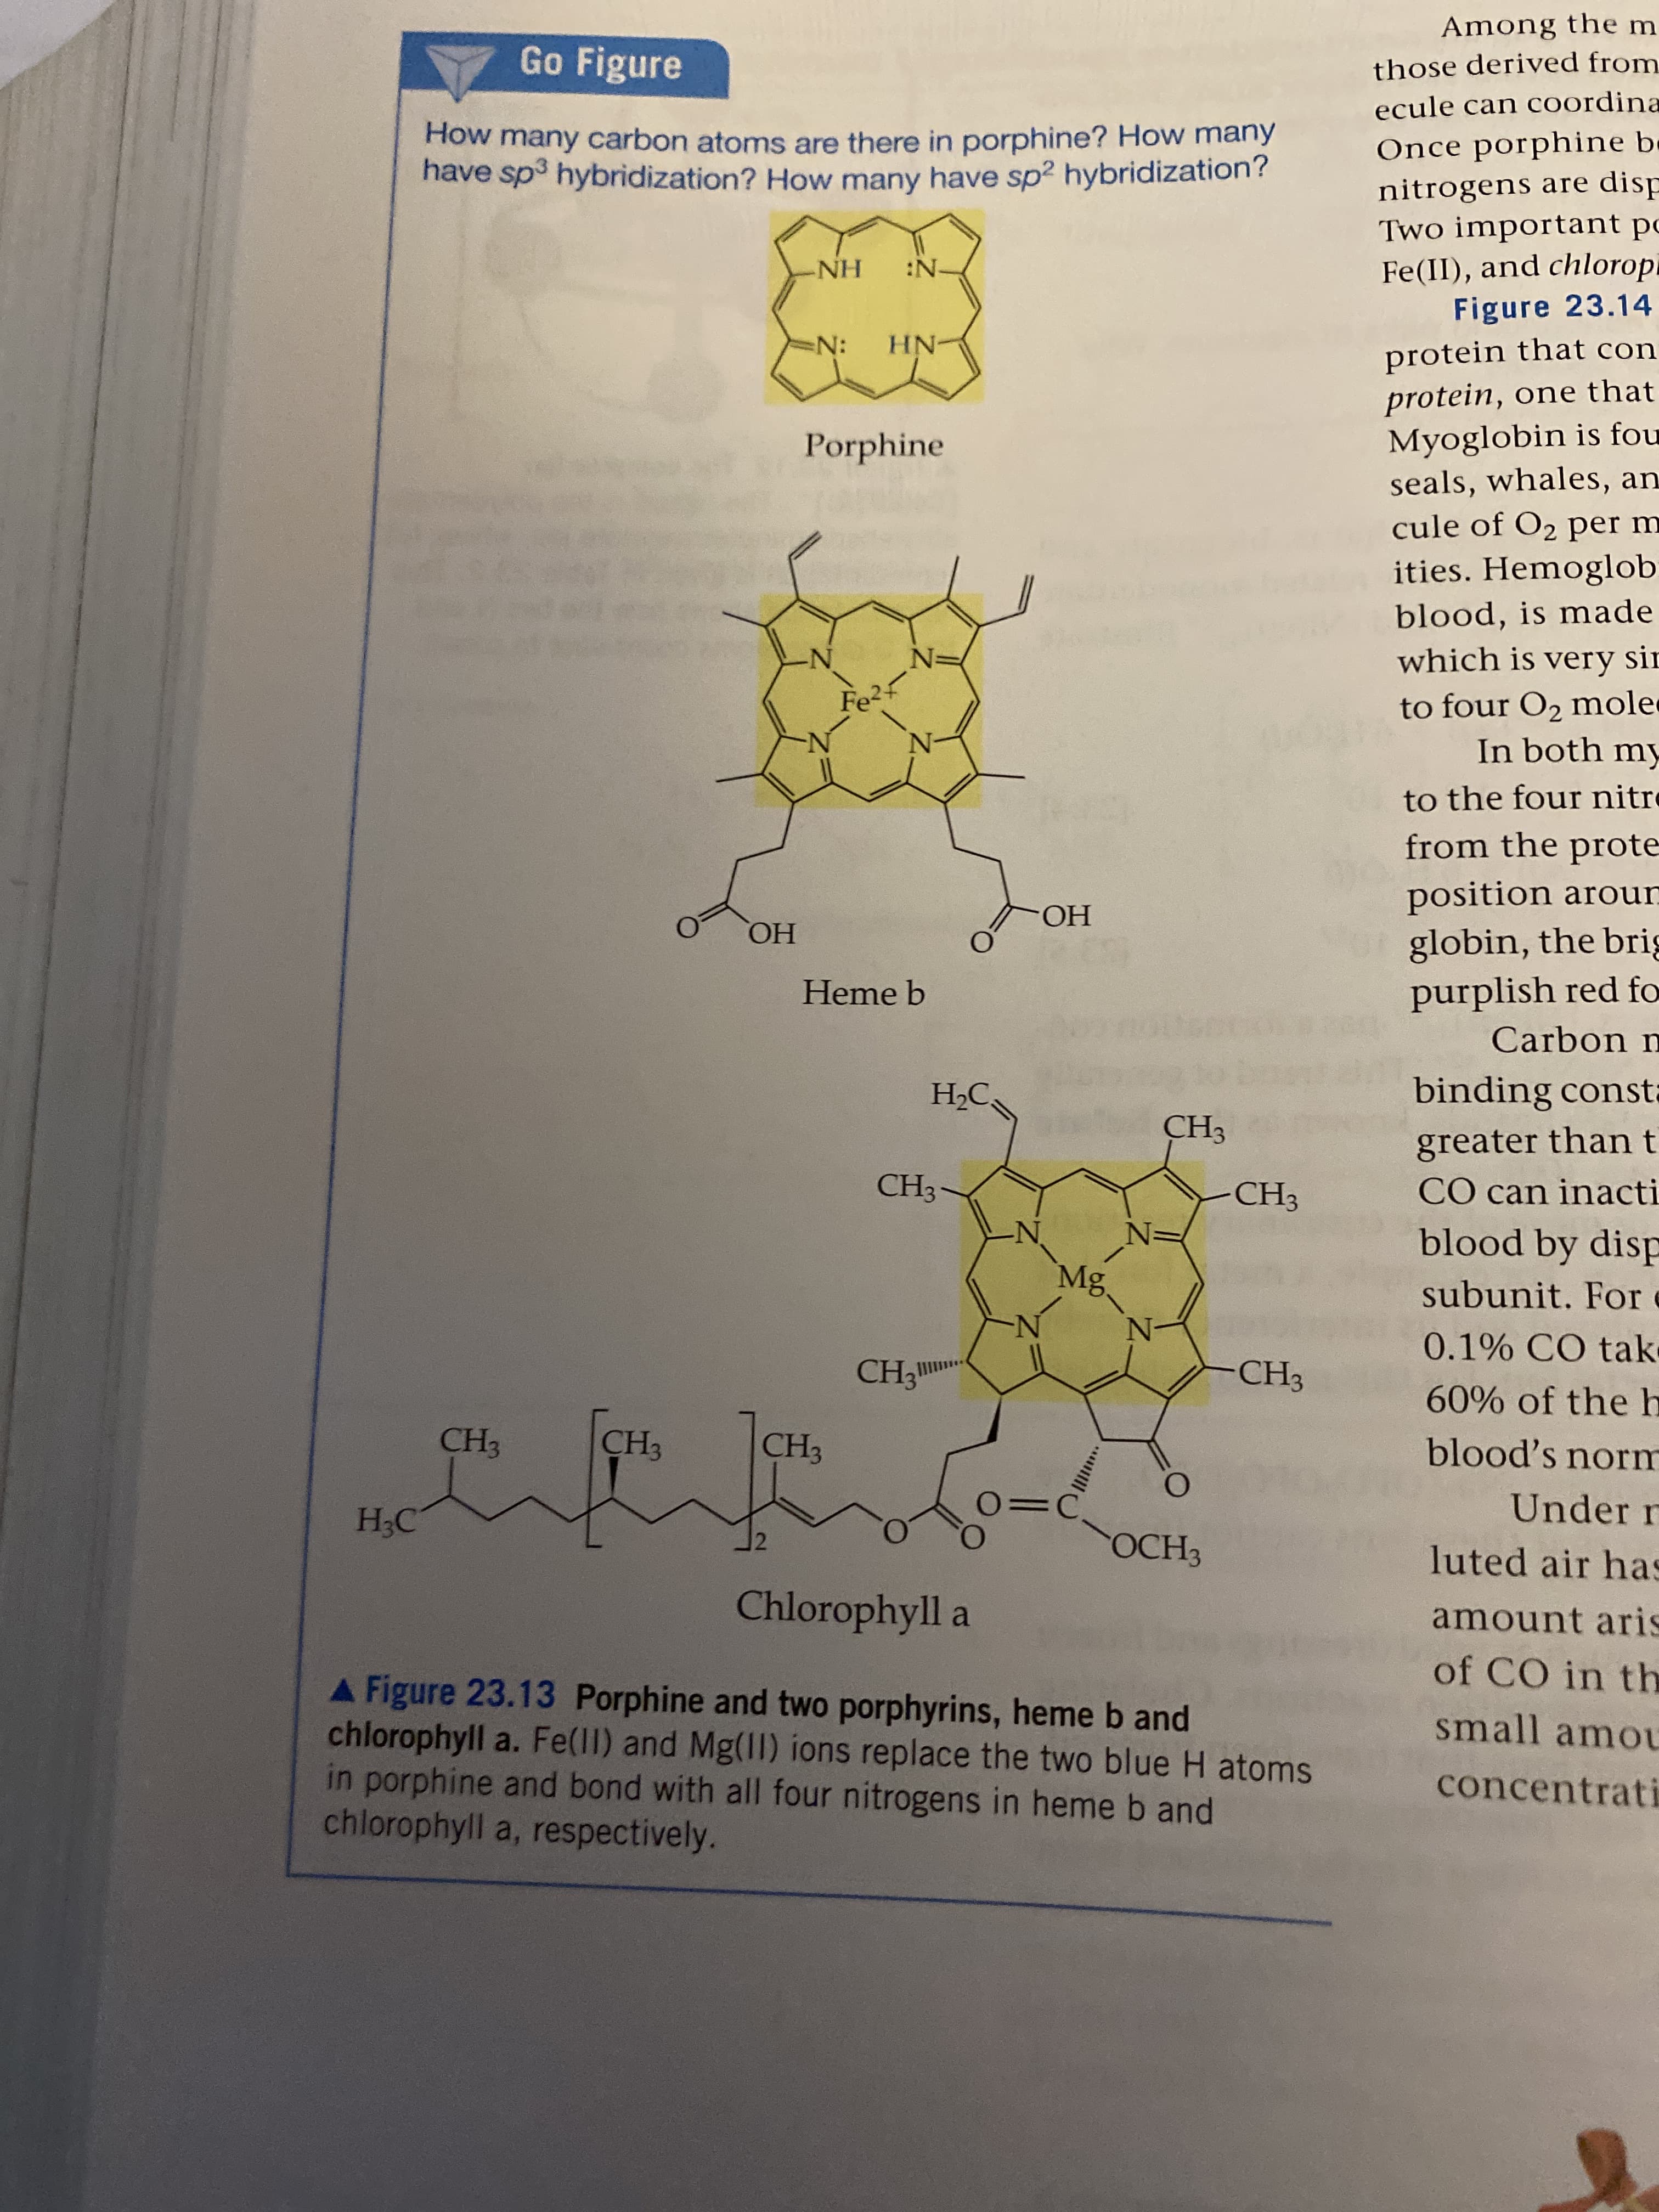 Among them
Go Figure
those derived from
ecule can coordina
How many carbon atoms are there in porphine? How many
have sp hybridization? How many have sp2 hybridization?
Once porphine be
nitrogens are disp
Two important po
ENH IN-
Fe(II), and chloropi
Figure 23.14
protein that con
protein, one that
Myoglobin is fou
seals, whales, an
cule of O2 per m
ities. Hemoglob
N:
HN-
Porphine
blood, is made
which is very sin
to four O2 mole
In both my
FeRF
to the four nitre
from the prote
position aroun
globin, the brig
purplish red fo
HO.
ОН
Heme b
Carbon n
Н С,
binding consta
CHз
greater than t
CH3-
CH3
CO can inacti
N'
blood by disp
Mg.
subunit. For
N-
0.1% CO tak
CH3
CH3
CH3
60% of the h
CH3
CH3
blood's norm
Under r
НС
ОС3З
luted air has
Chlorophyll a
amount aris
of CO in th
A Figure 23.13 Porphine and two porphyrins, heme b and
chlorophyll a. Fe(ll) and Mg(I1) ions replace the two blue H atoms
in porphine and bond with all four nitrogens in heme b and
chlorophyll a, respectively.
small amou
concentrati
|
